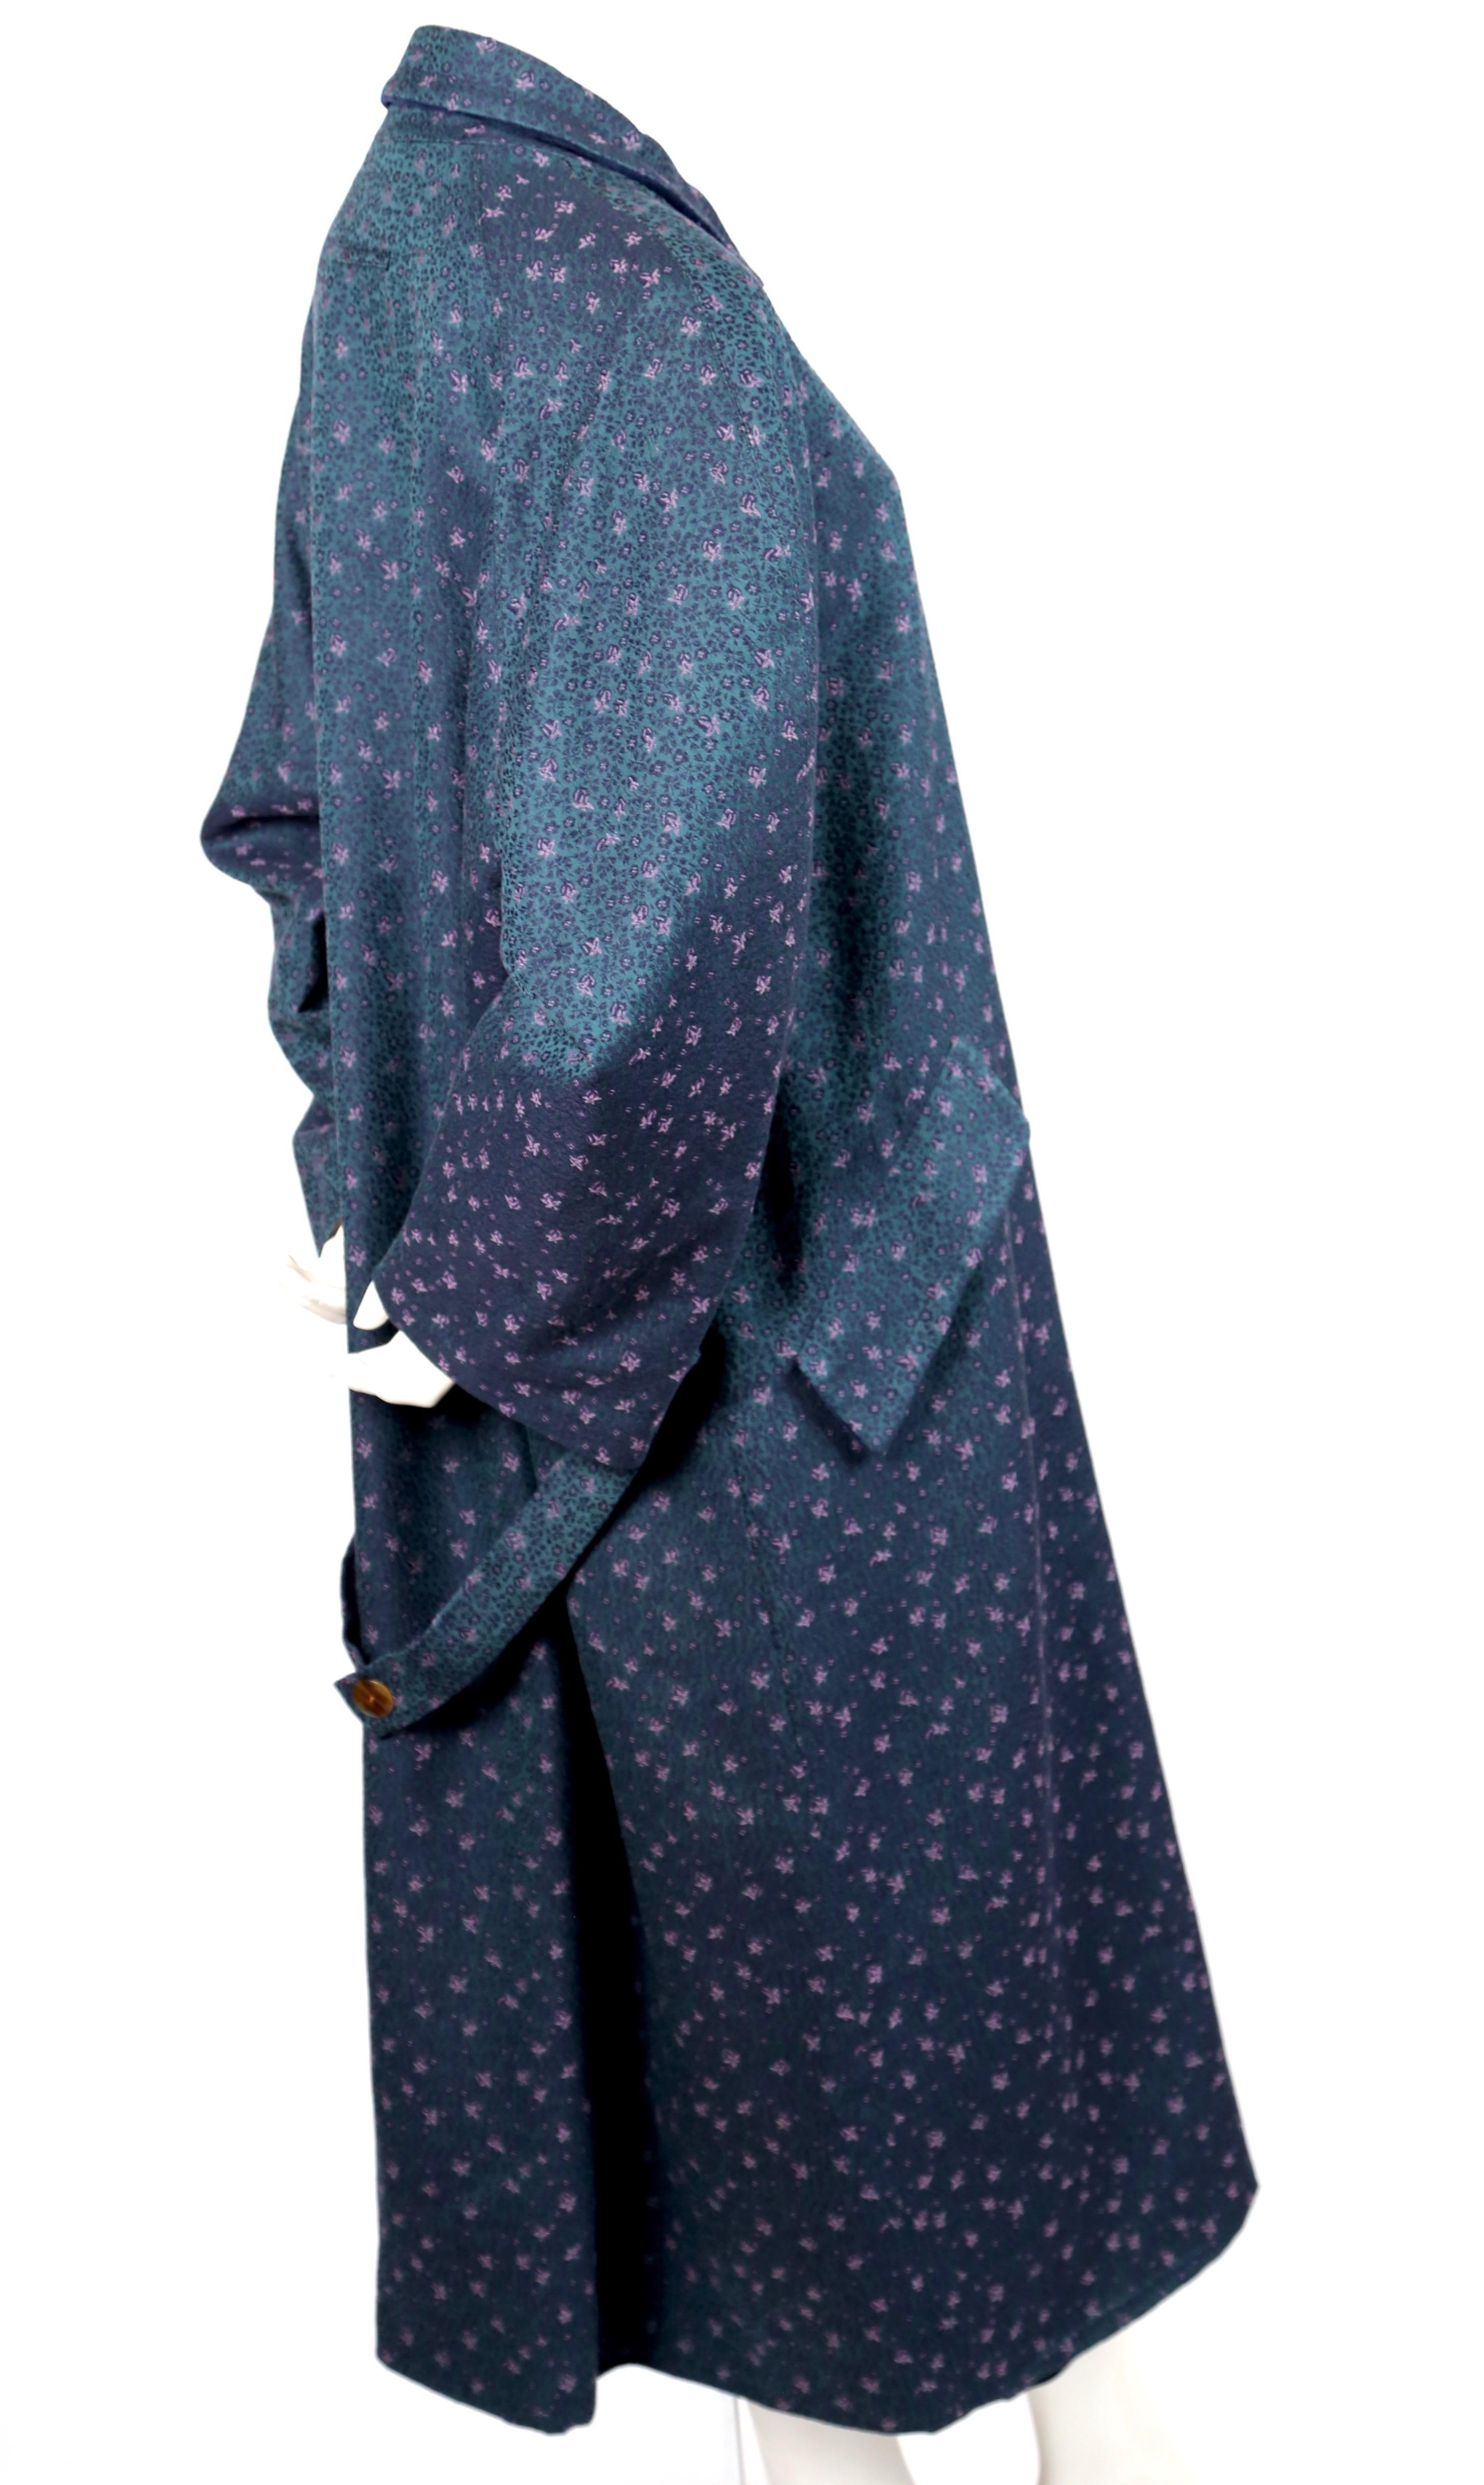 Oversized, blue, green and purple floral jacquard wool overcoat designed by Jean Paul Gaultier for Gibo dating to fall of 1985 as seen on the runway. No size is indicated however this fits many sizes due to the oversized cut. Coat was photographed